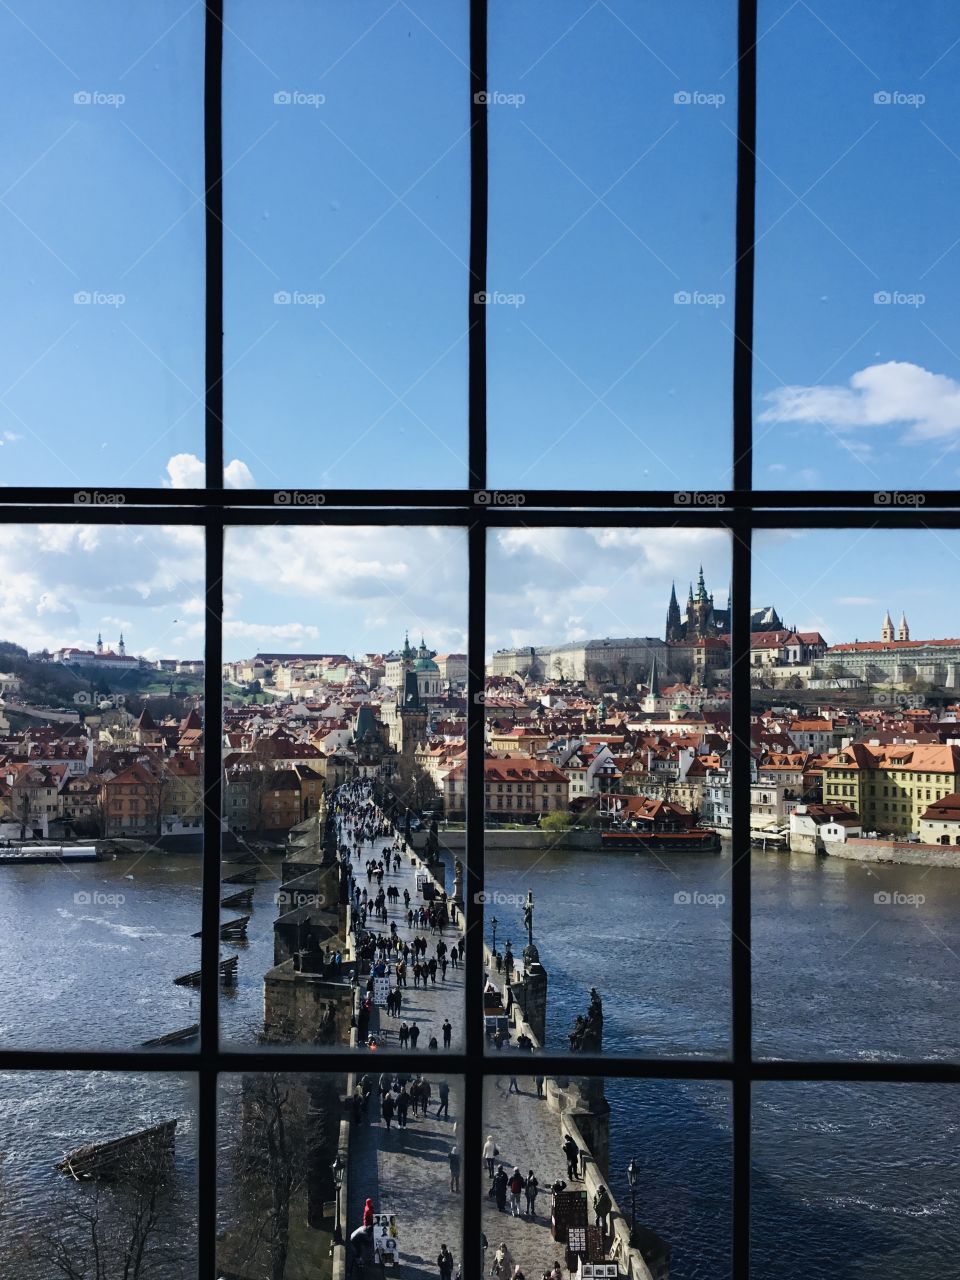 View from the window. St. Charles Bridge. Framing the photo draws focus to the subject in the photo by blocking other parts of the image with something in the scene